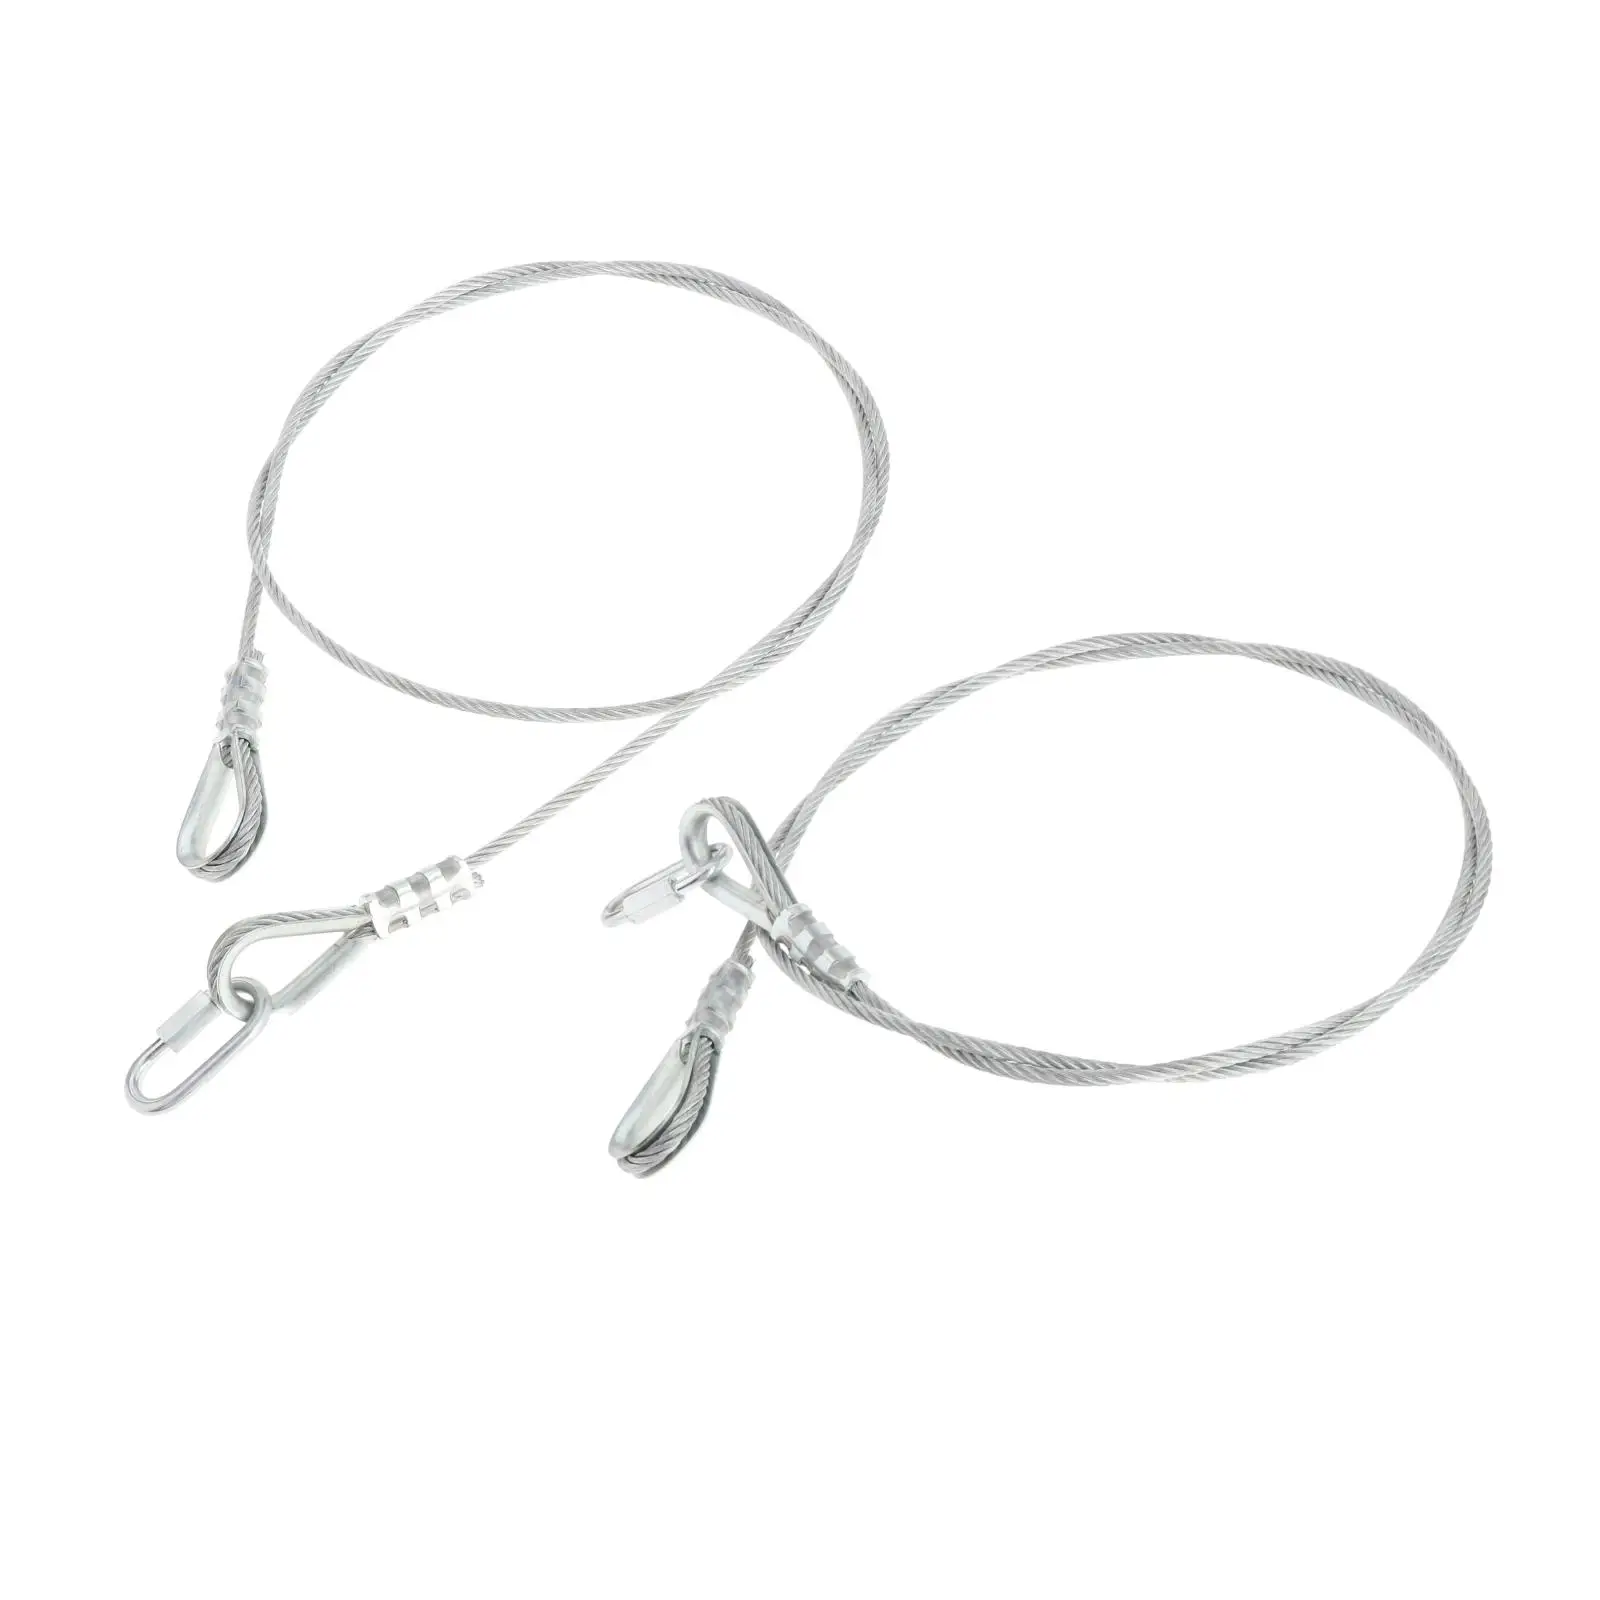 2 Pcs Replacement Cables 15 Minute Install For Gorilla Lift With EZ Spring Clips Stainless Steel